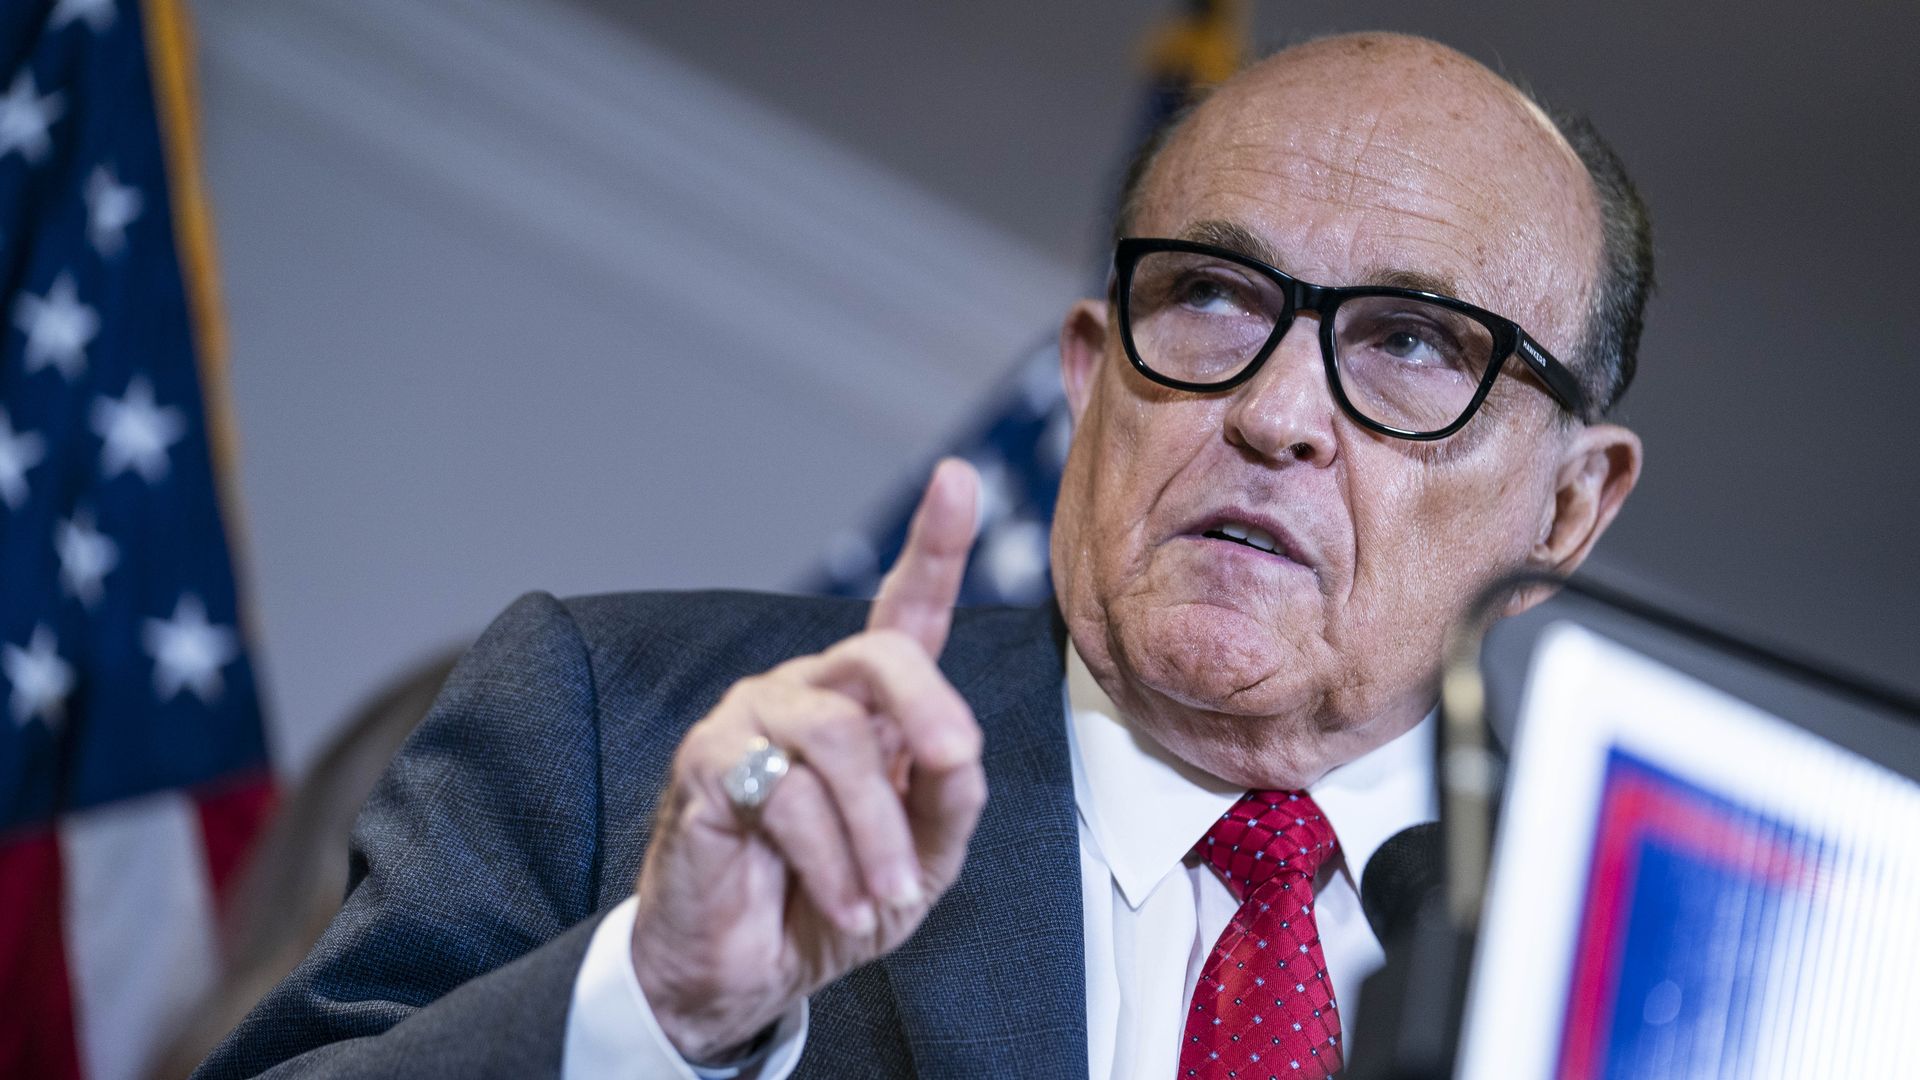 Former New York City Mayor Rudy Giuliani, lawyer for U.S. President Donald Trump, speaks during a news conference.